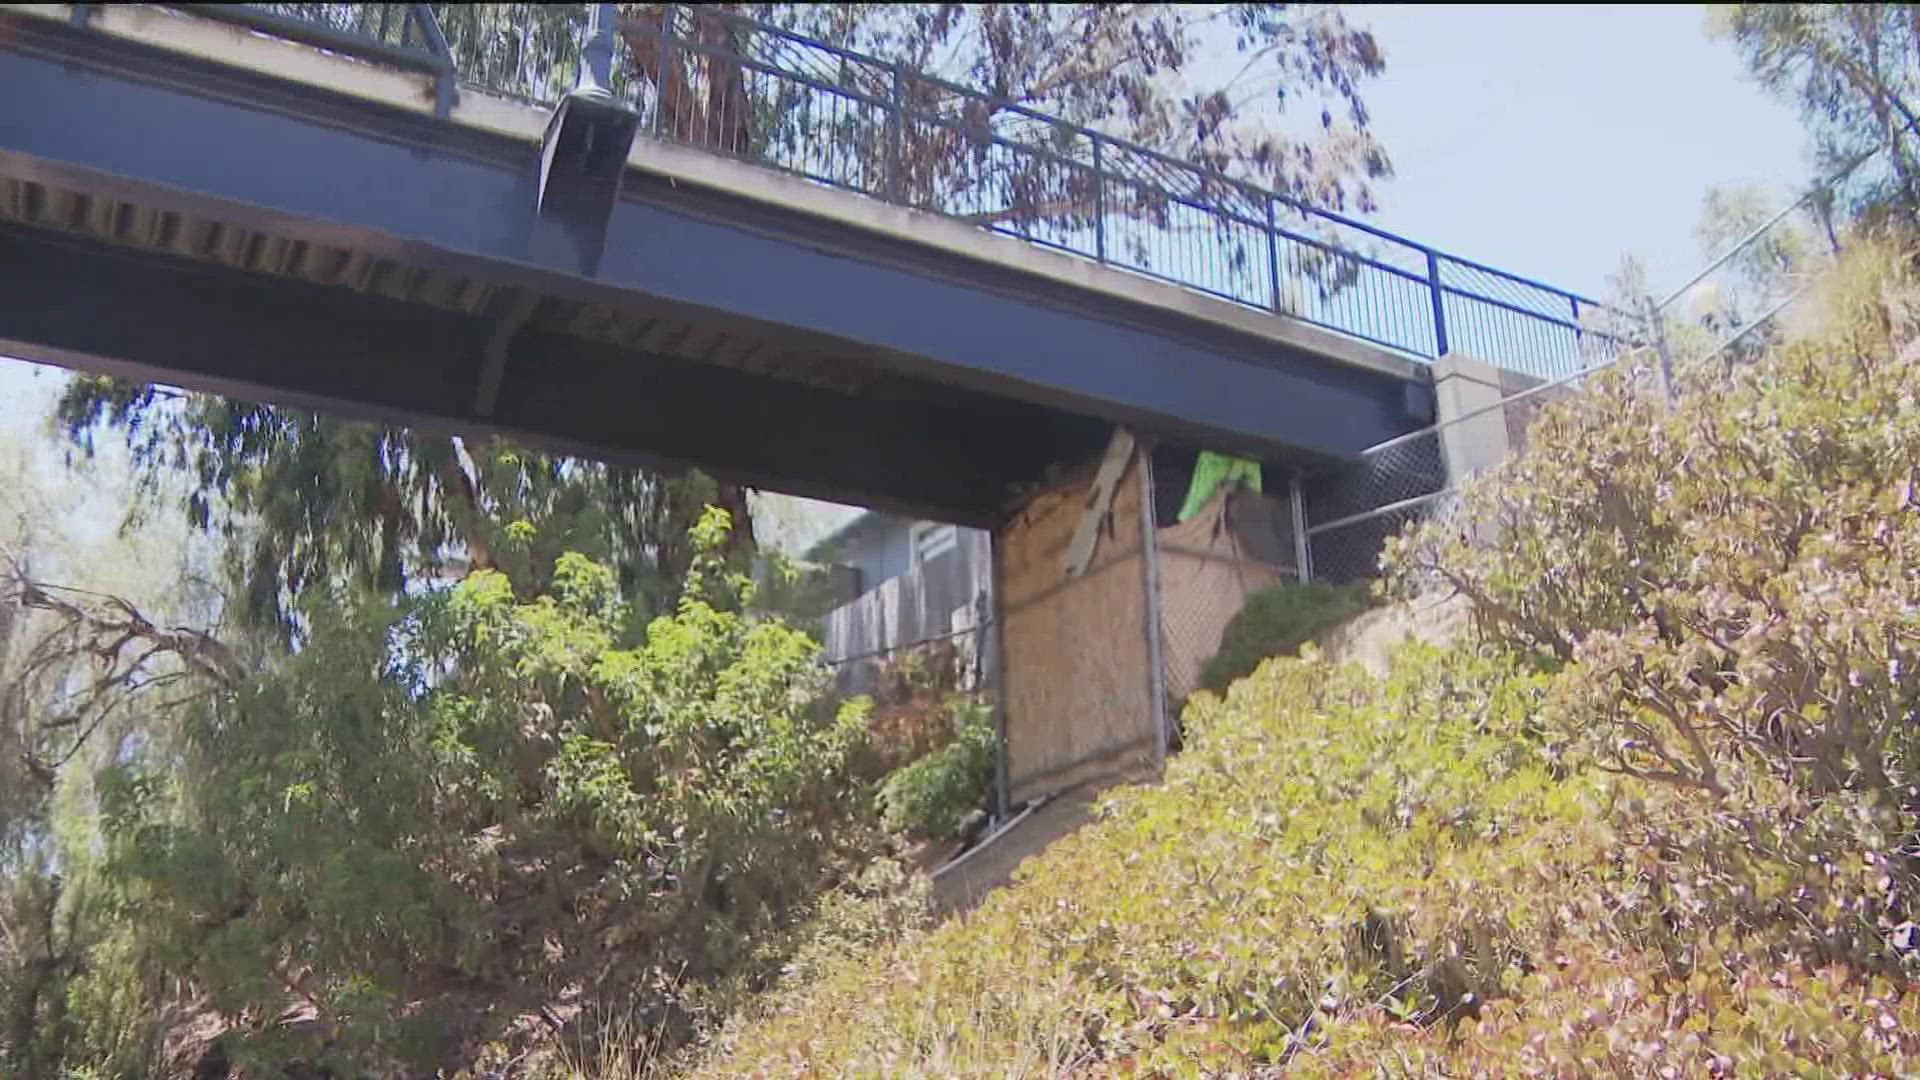 Under the bridge’s north entrance, one encampment in particular has been a major cause for concern.